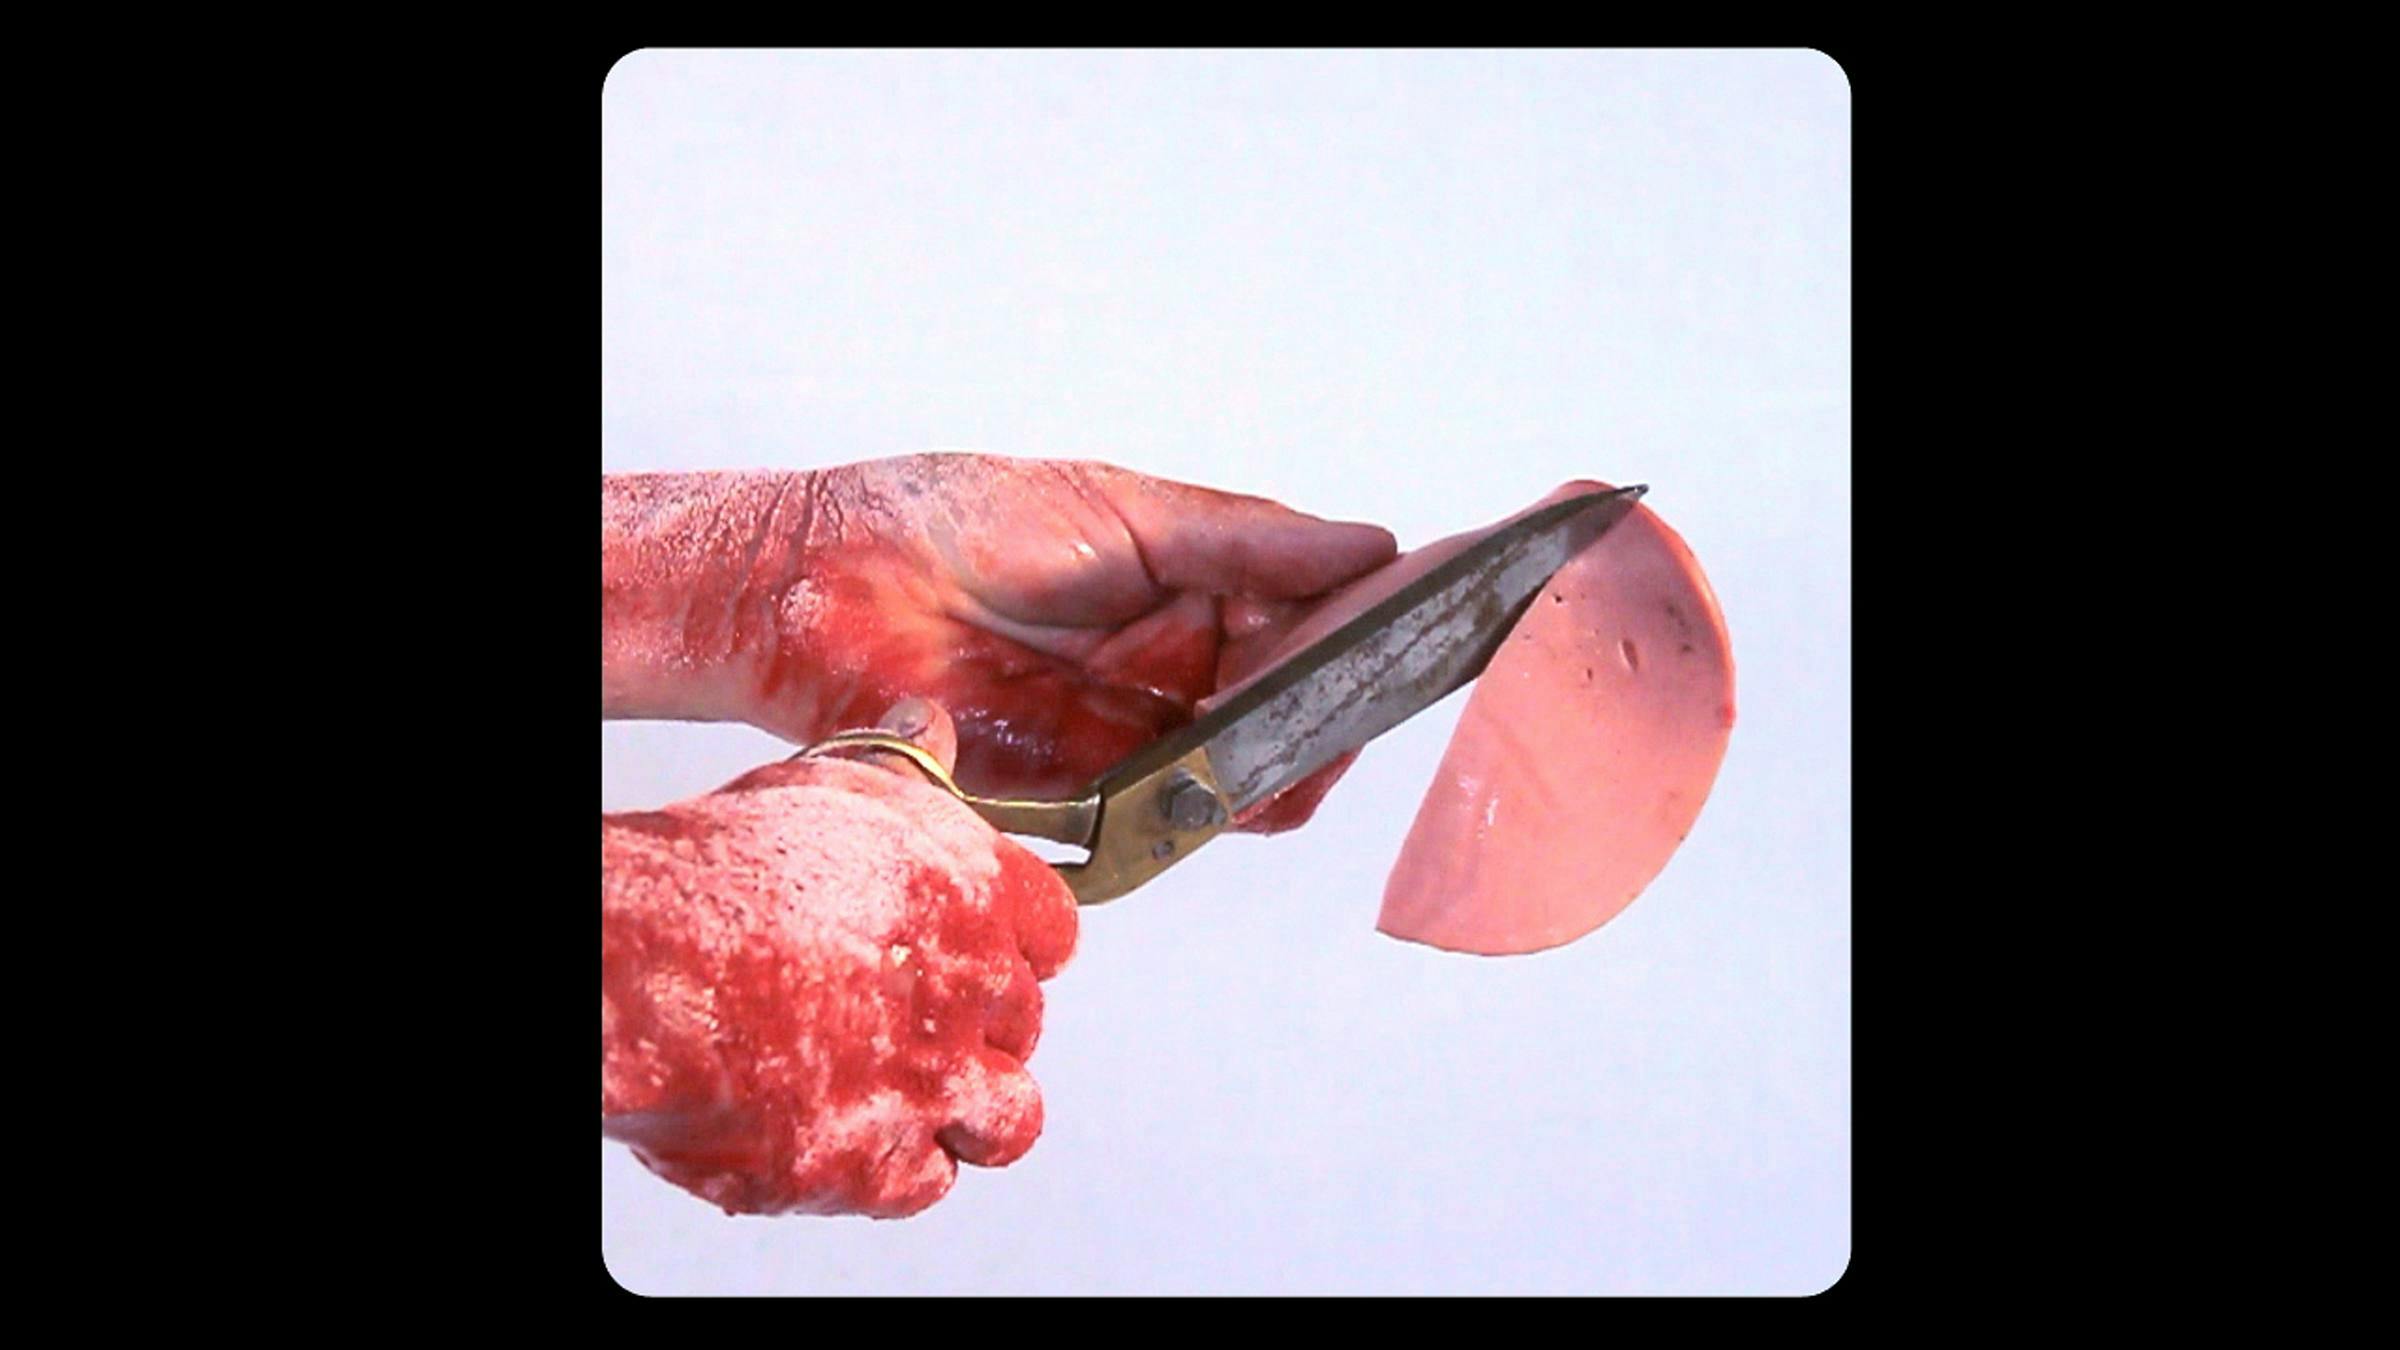 Two hands covered in red markings cut a piece of ham with some large metal scissors.